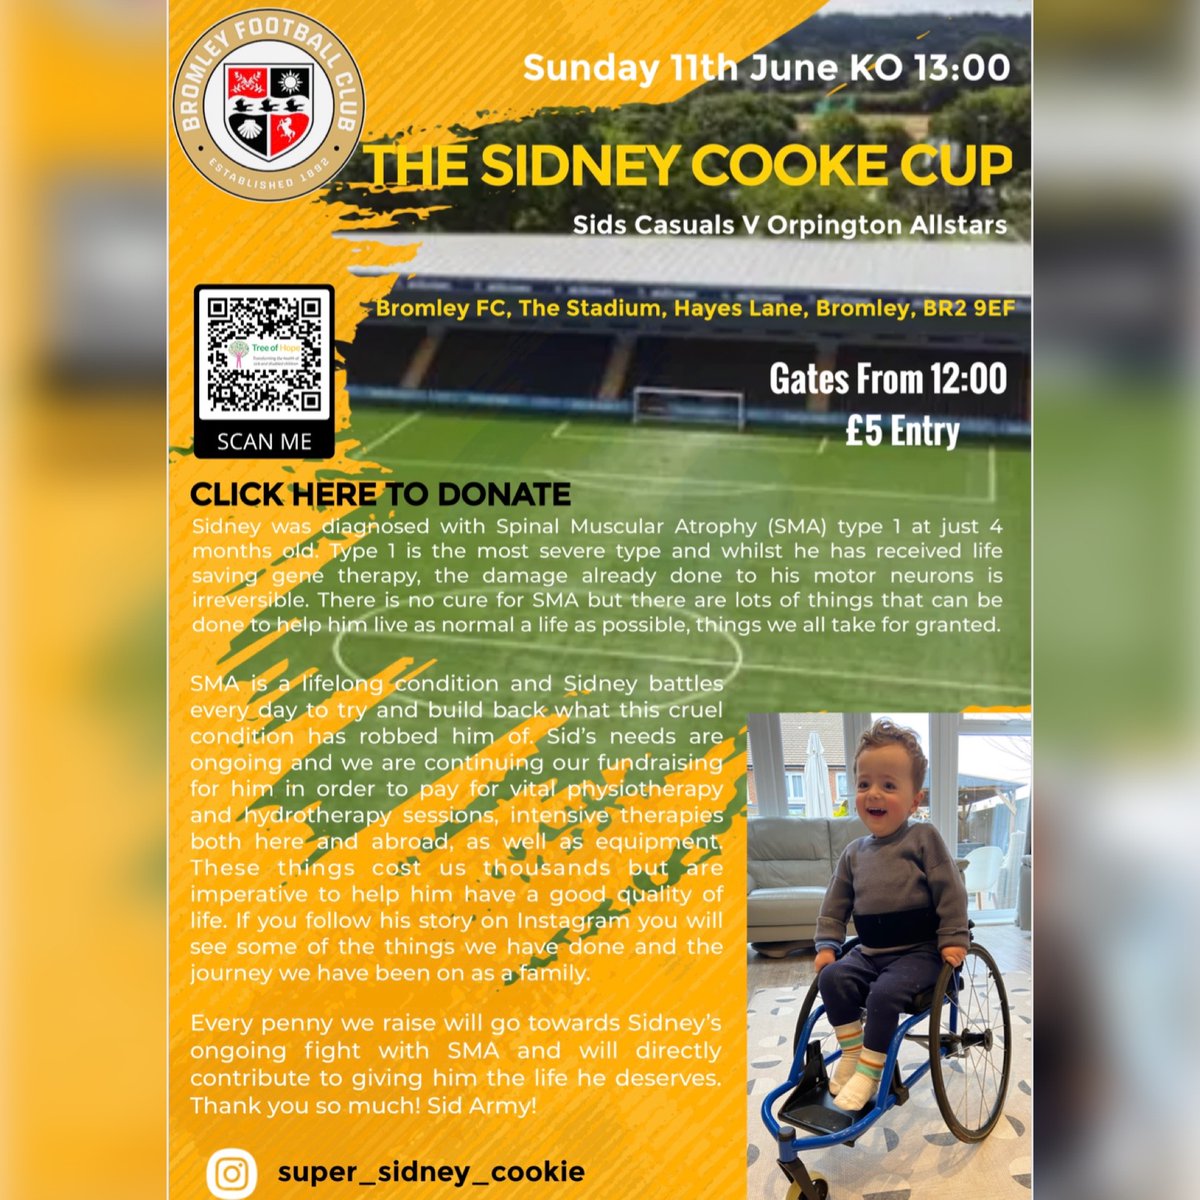 𝗧𝗵𝗲 𝗦𝗶𝗱𝗻𝗲𝘆 𝗖𝗼𝗼𝗸𝗲 𝗖𝘂𝗽 🏆

We are delighted to be hosting Sid Casuals vs Orpington Allstars, in support of Sidney Cooke who is fighting SMA.

🗓 11th June
🕛 Gates open from 12pm
💷 £5 entry

You can donate by clicking here 👉 treeofhope.org.uk/help-super-sid…

#WeAreBromley